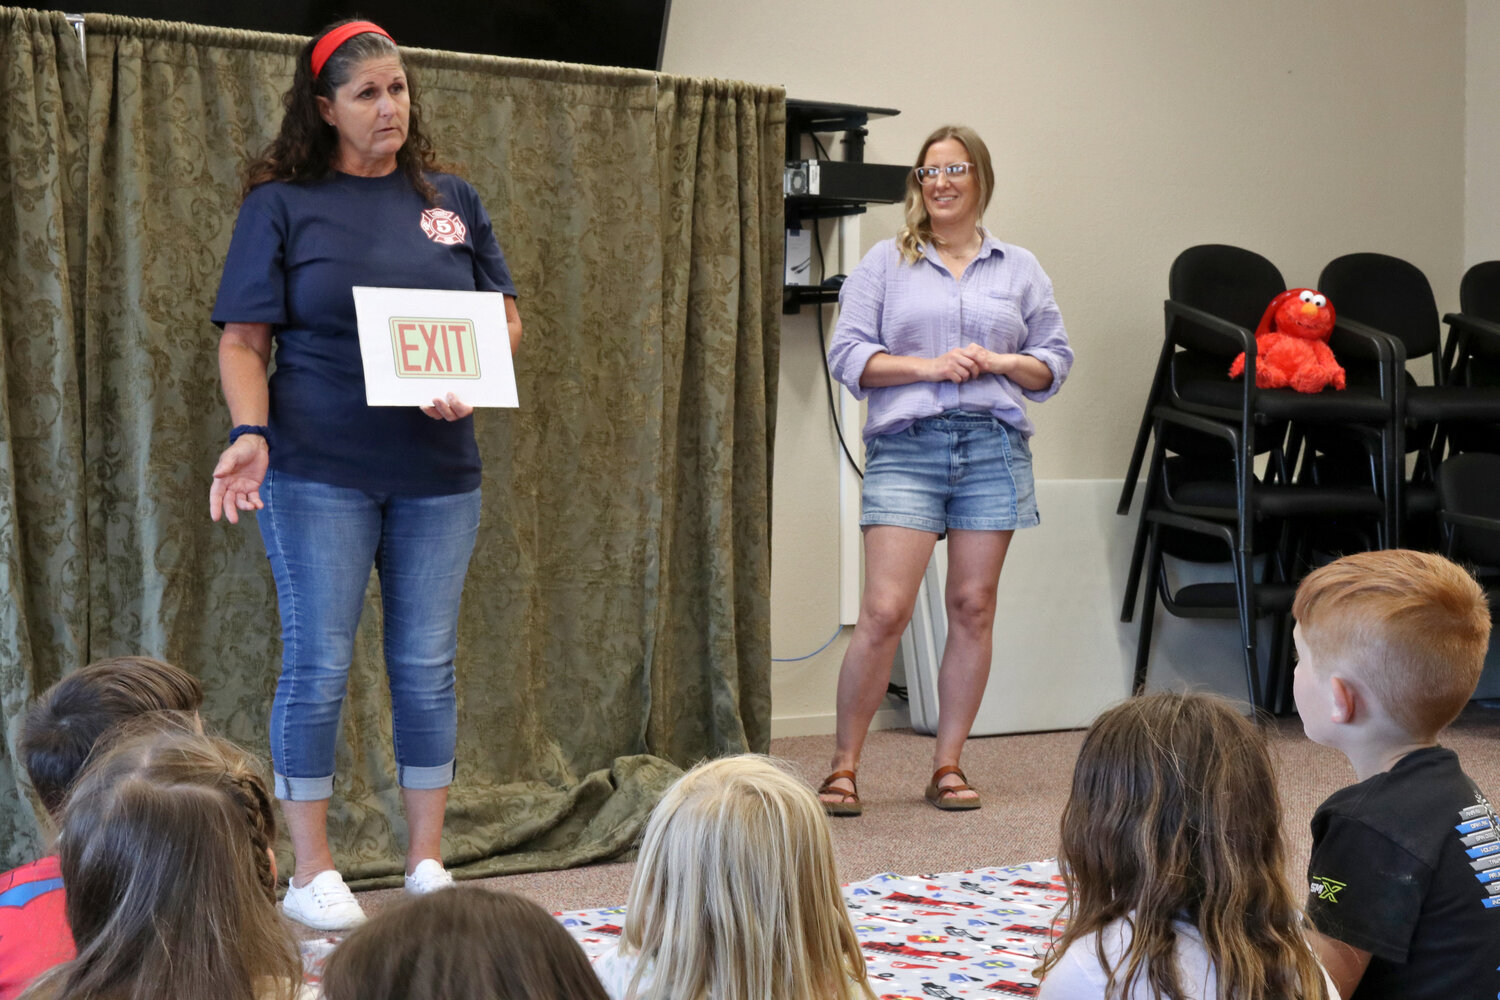 Lewis County District 5 employees Carmen Sundin Jessica Blair explain the importance of exit signs to visiting Napavine Elementary School kindergarteners in Napavine on Tuesday, June 6.